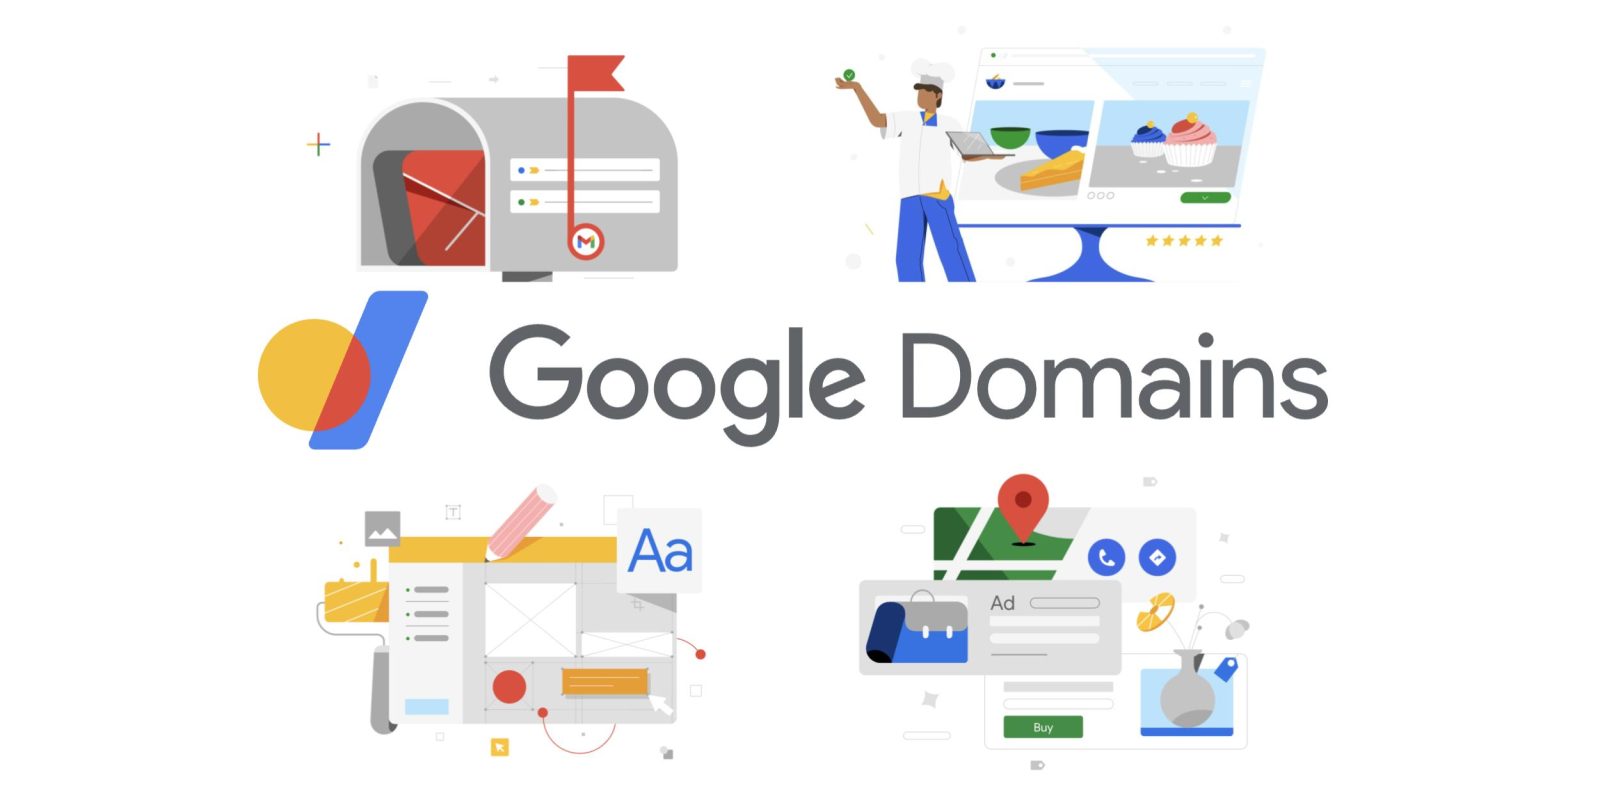 google-domains-cover.jpeg?quality=82&strip=all&w=1600